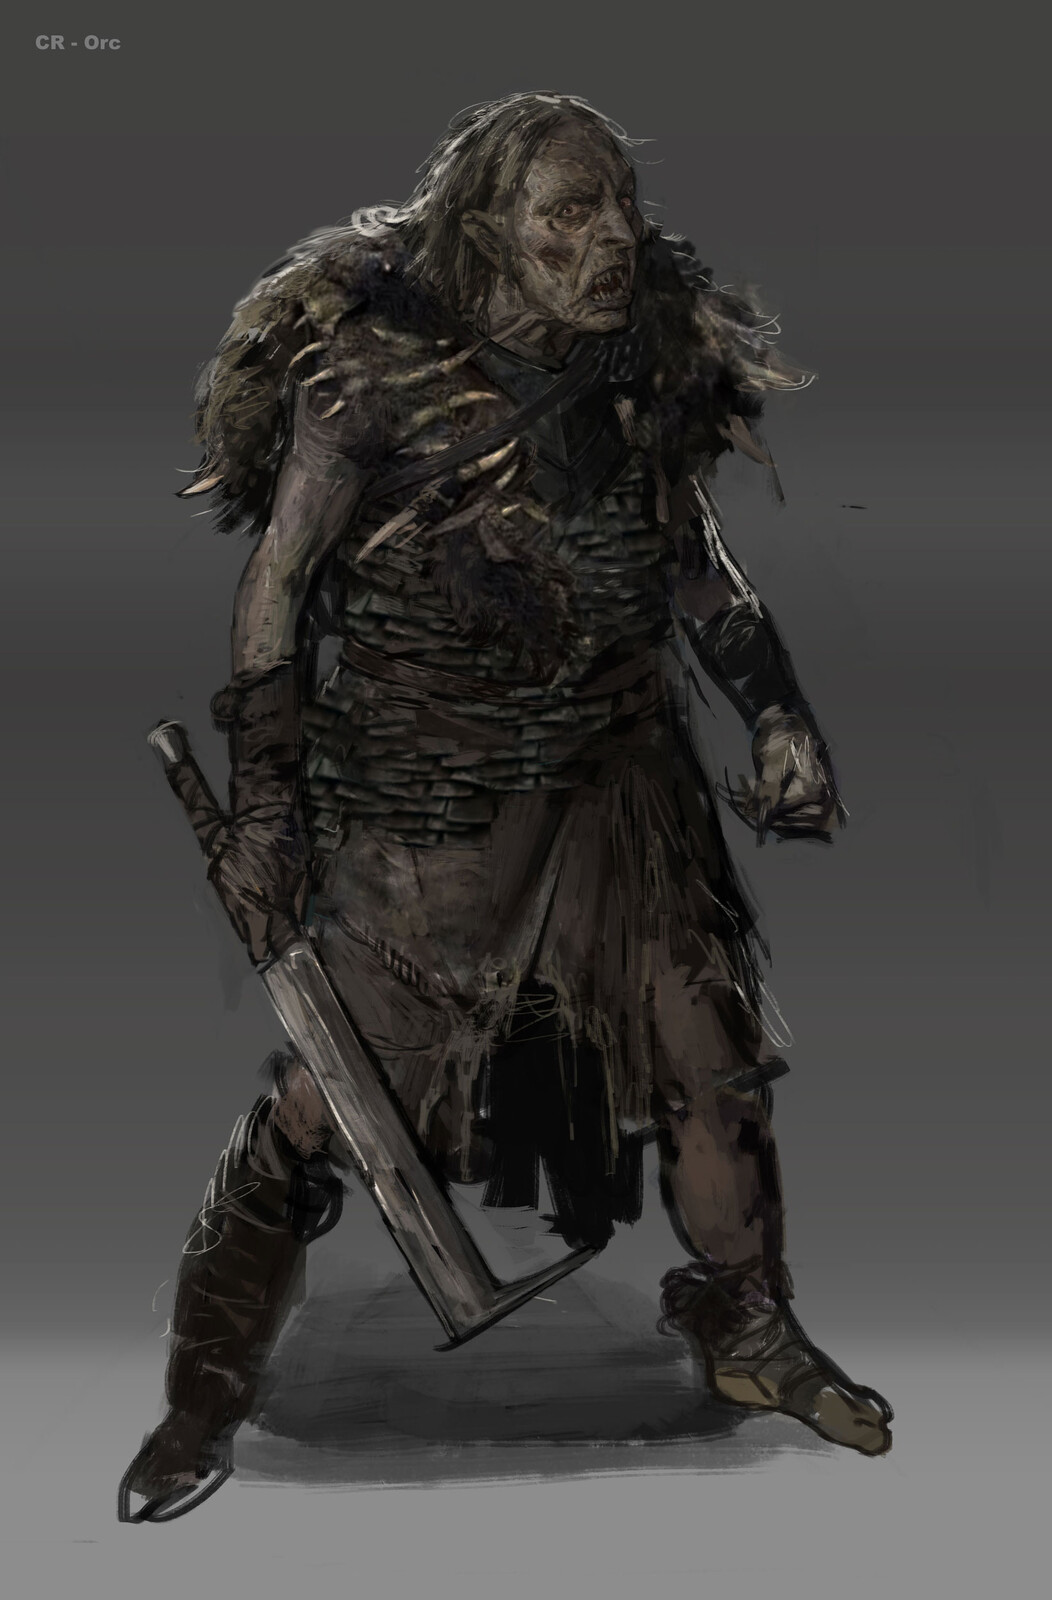 Generic orc concept. Some photo bashing was used for the outfit.